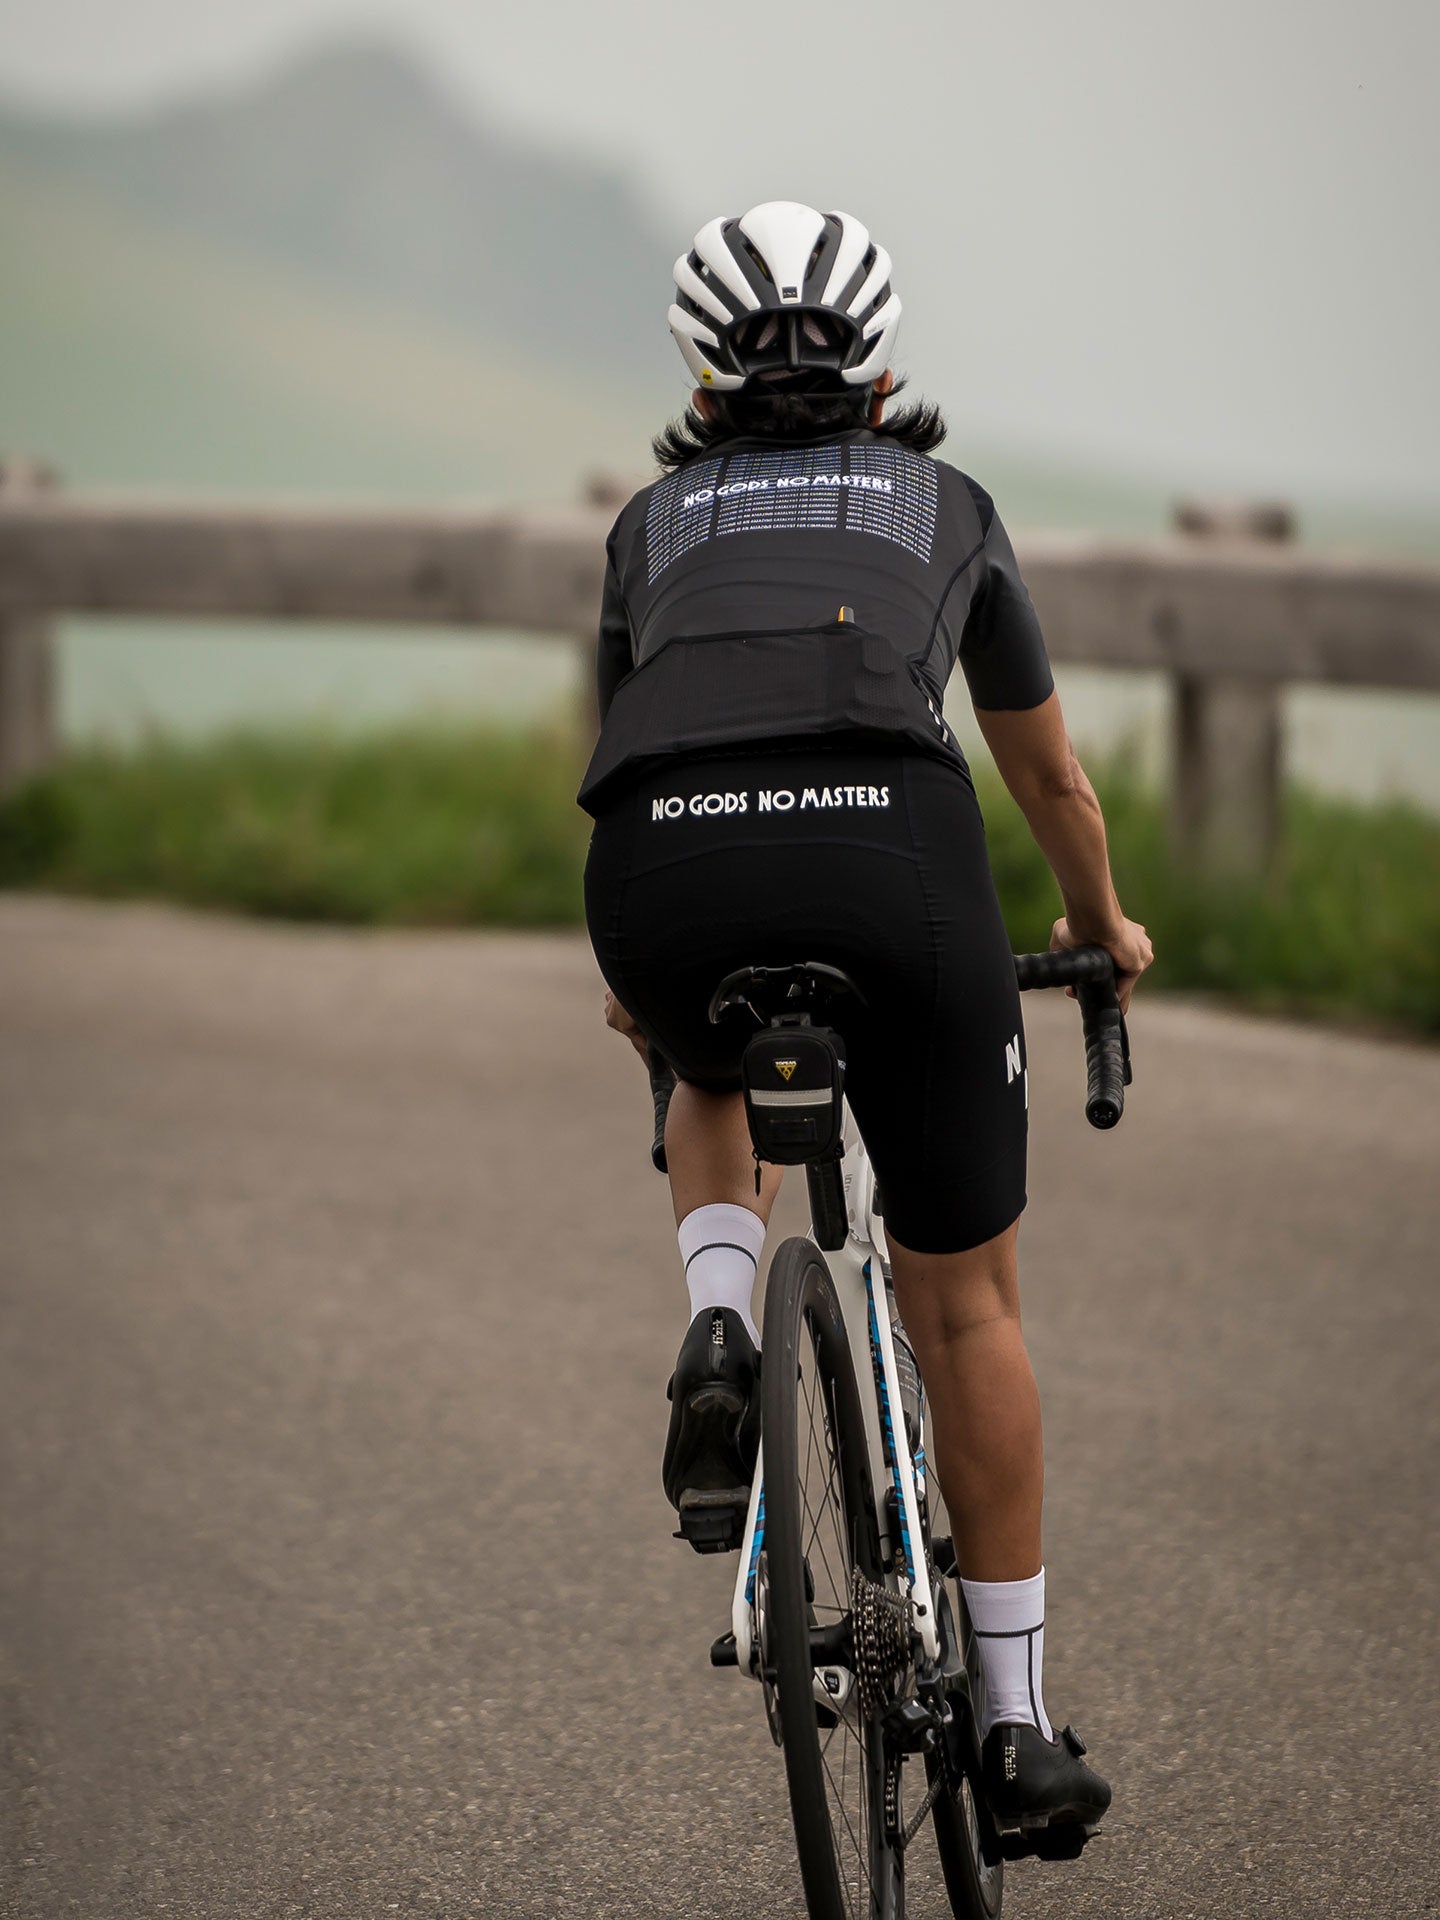 NGNM Black Mantra Performance Jersey back with white logo